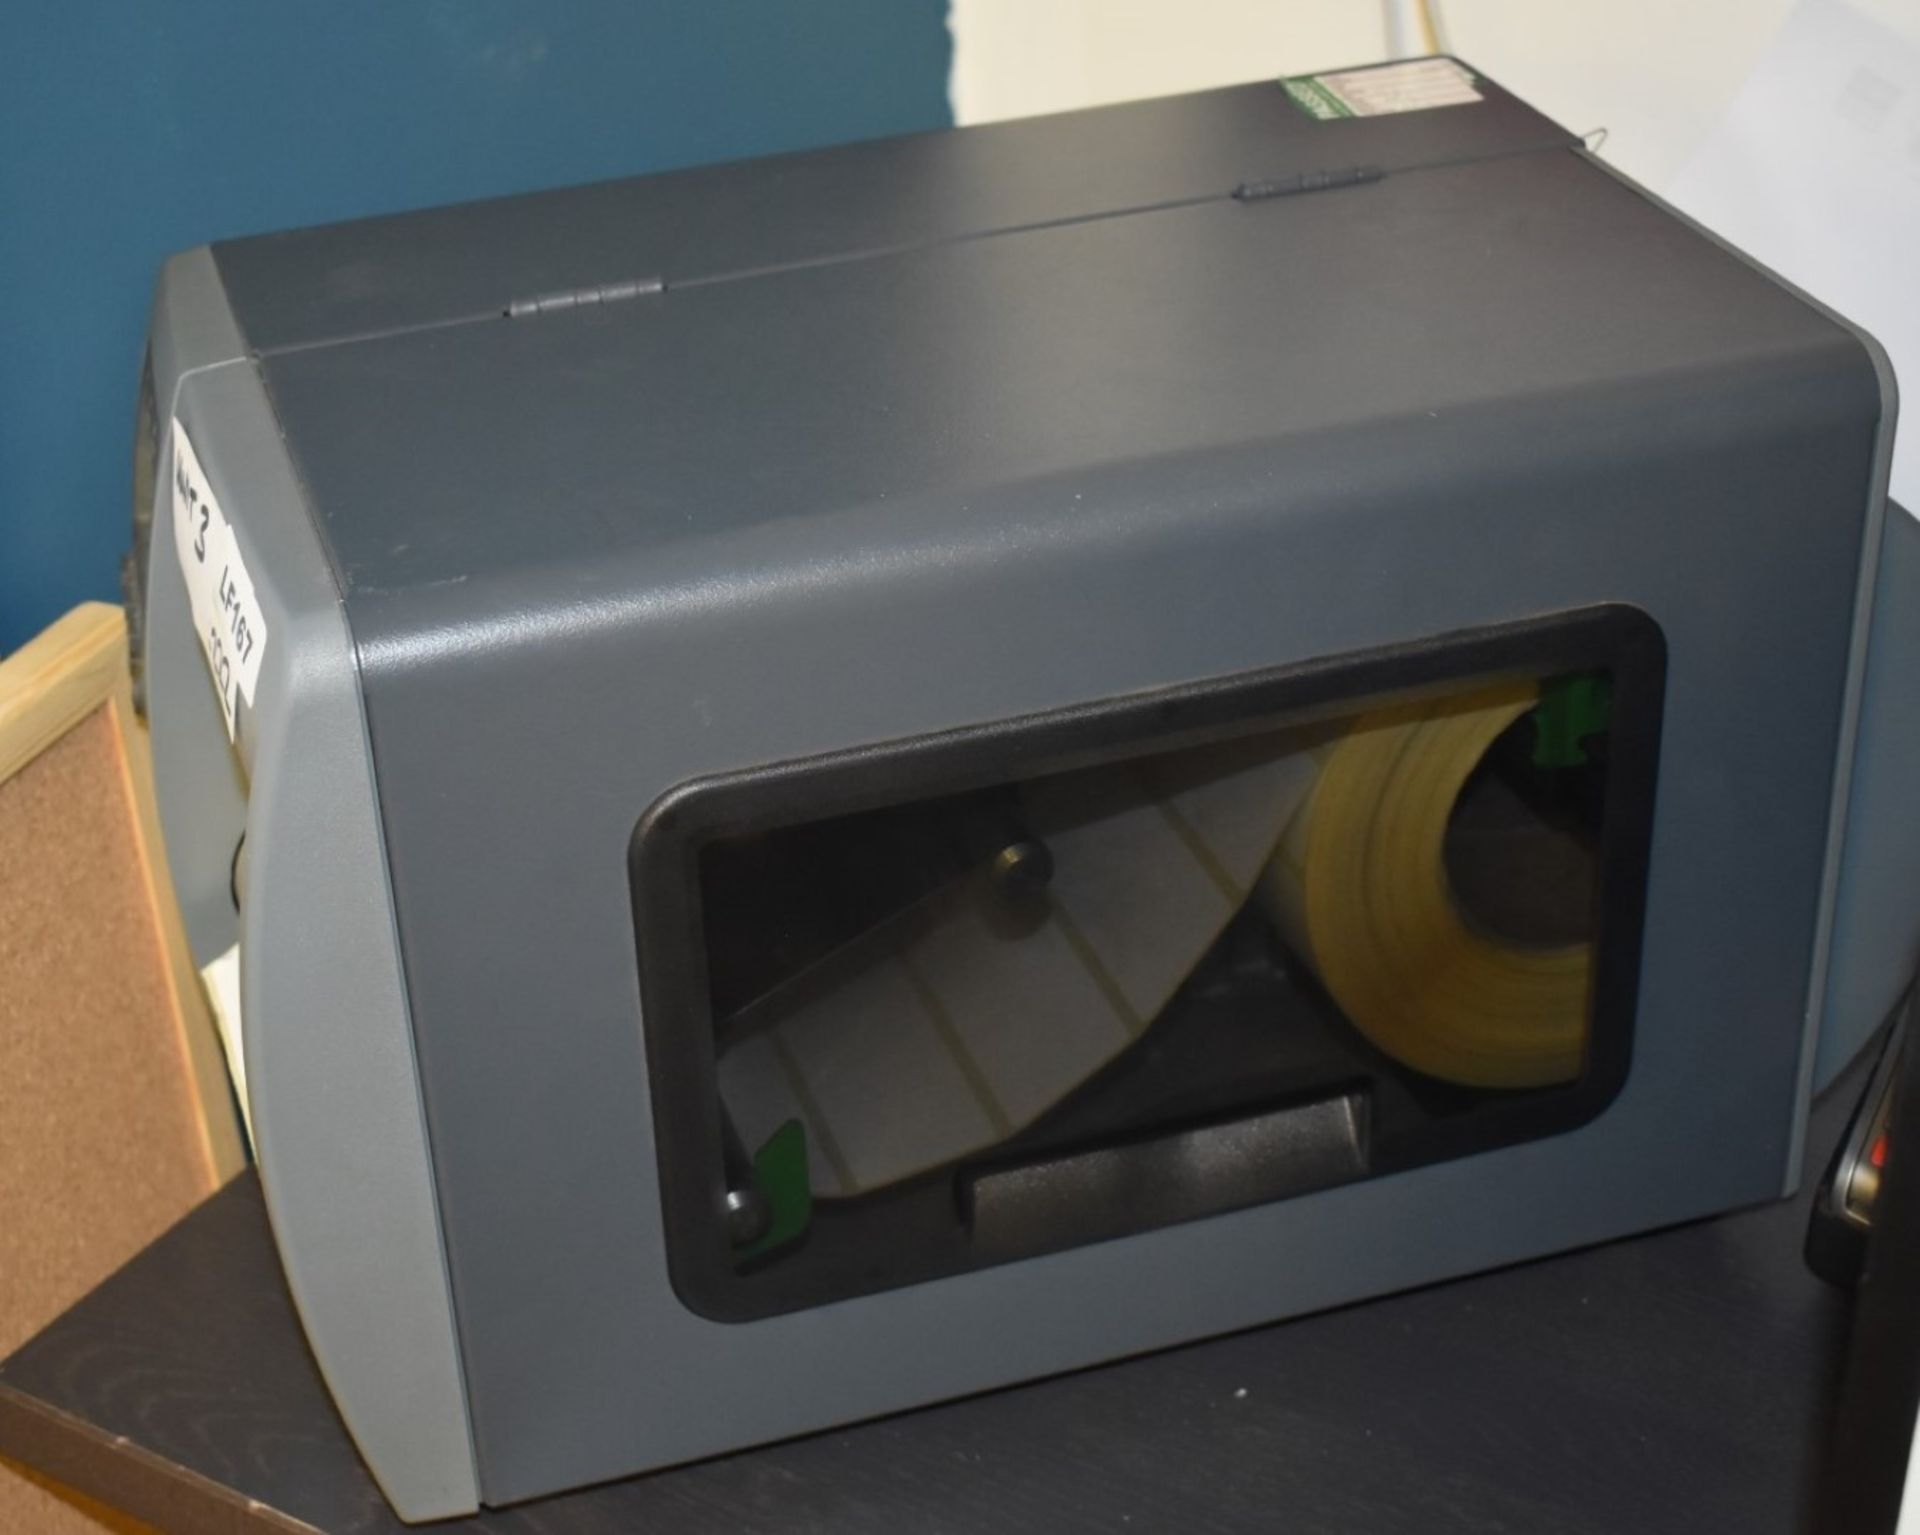 1 x Datamax O'Neil M-Class Mark II Industrial Thermal Label Printer With USB Connectivity - Includes - Image 4 of 4